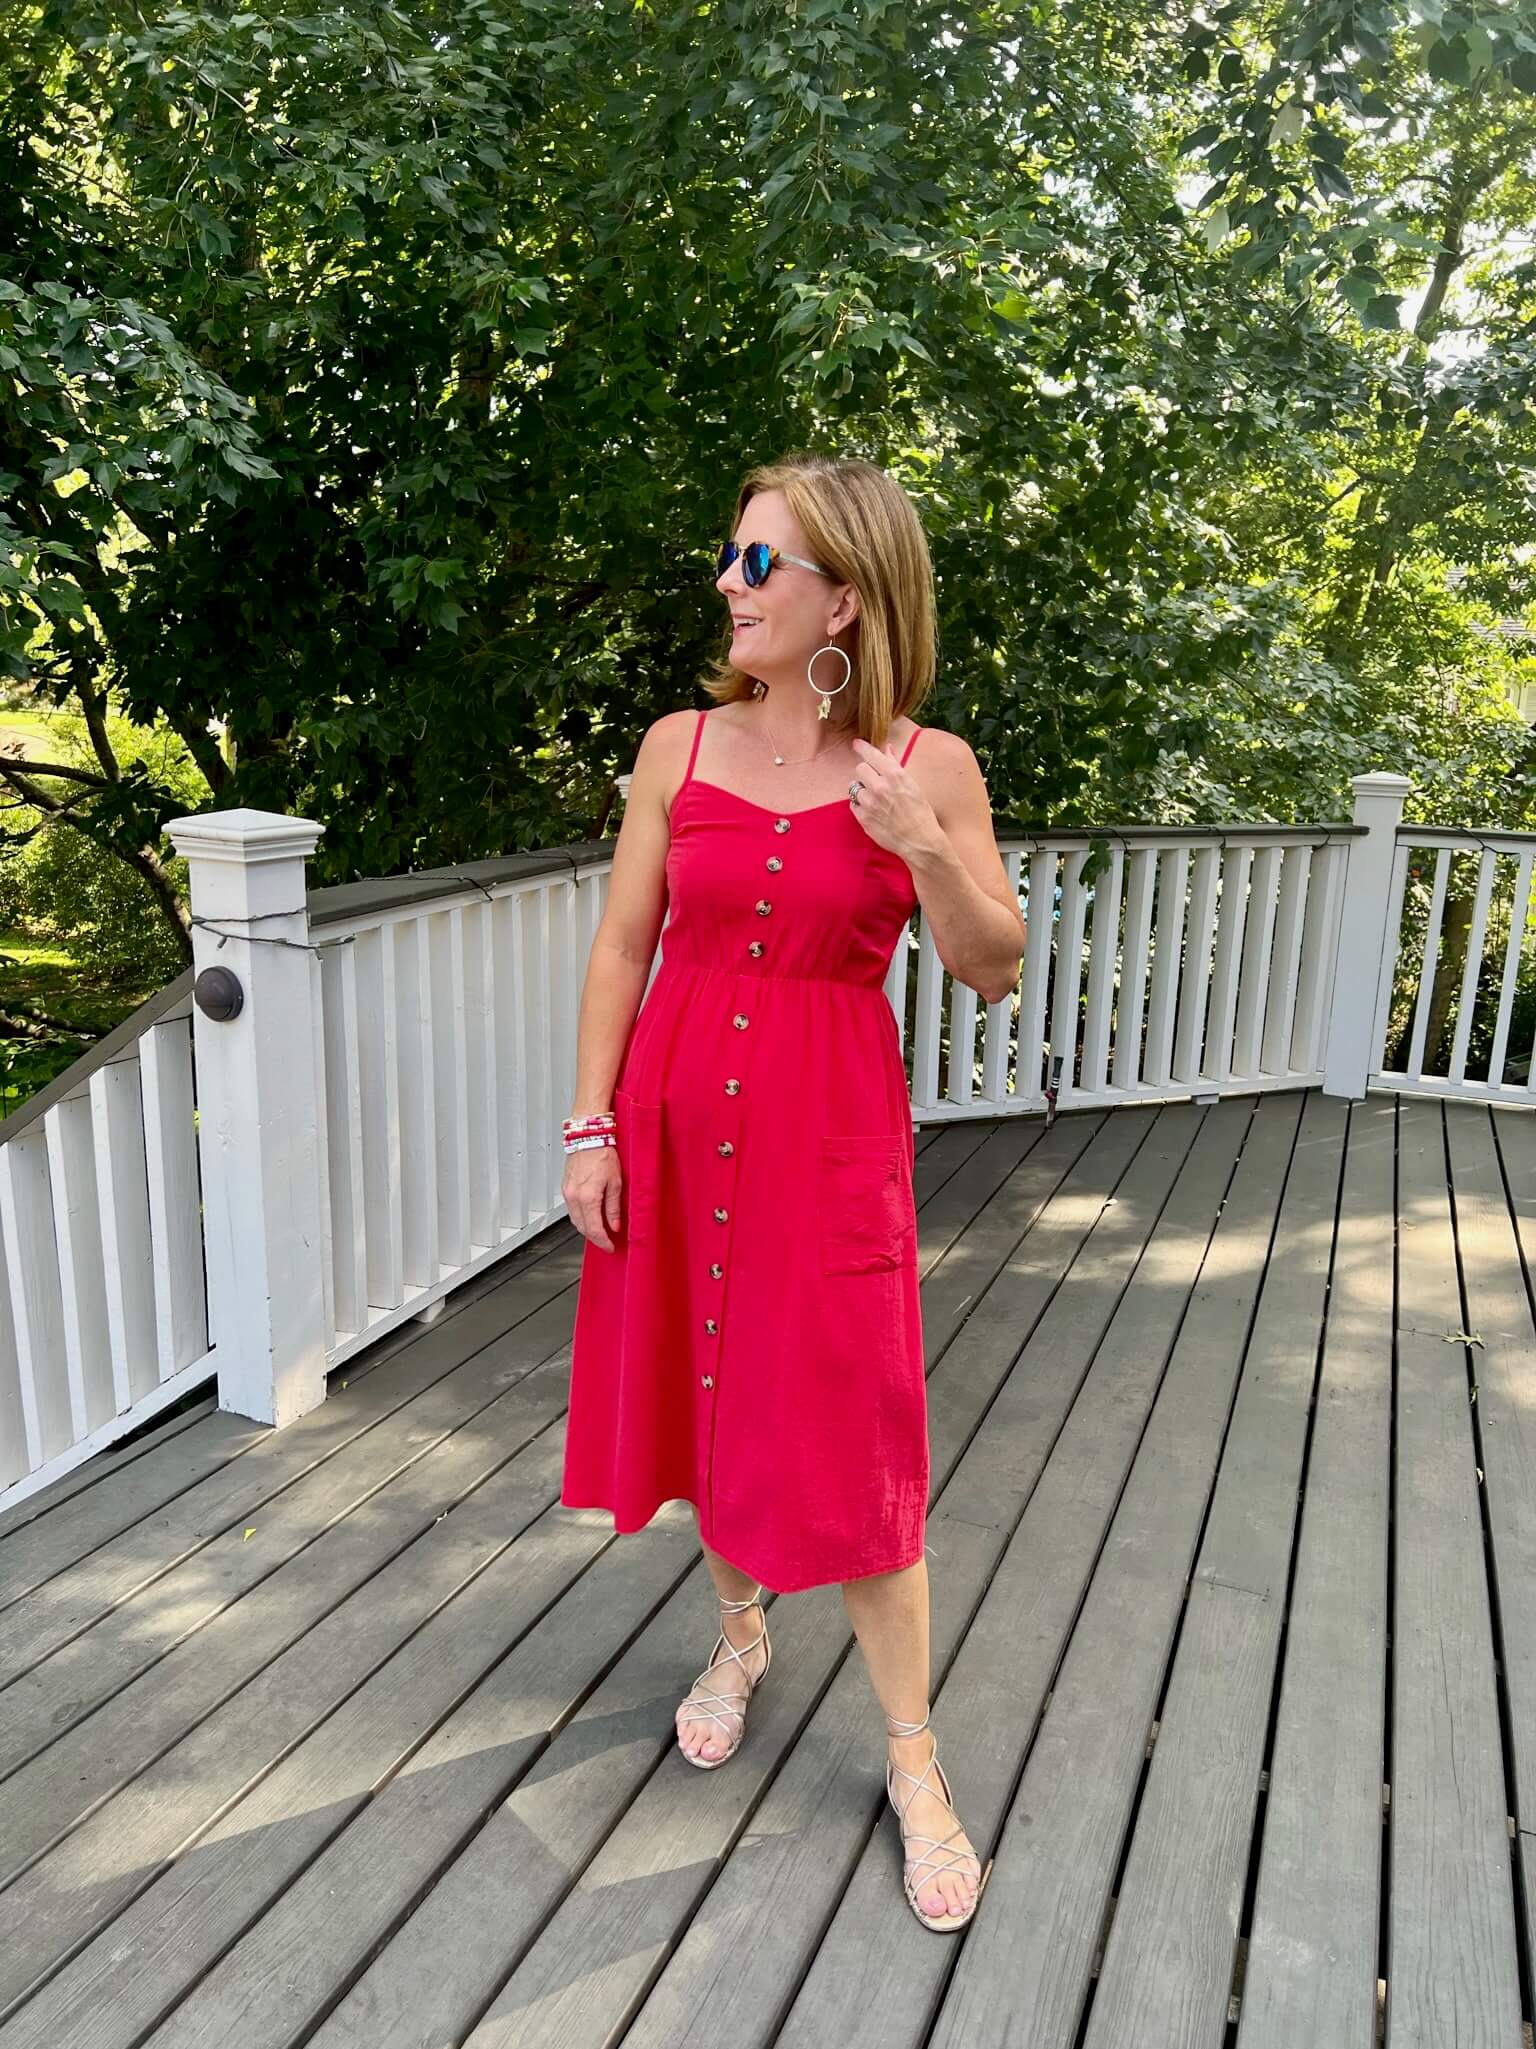 How To Look Festive For July 4th Red Sundress what to wear for July 4th how accessorize a red dress for the 4th how to accessorize a sundress